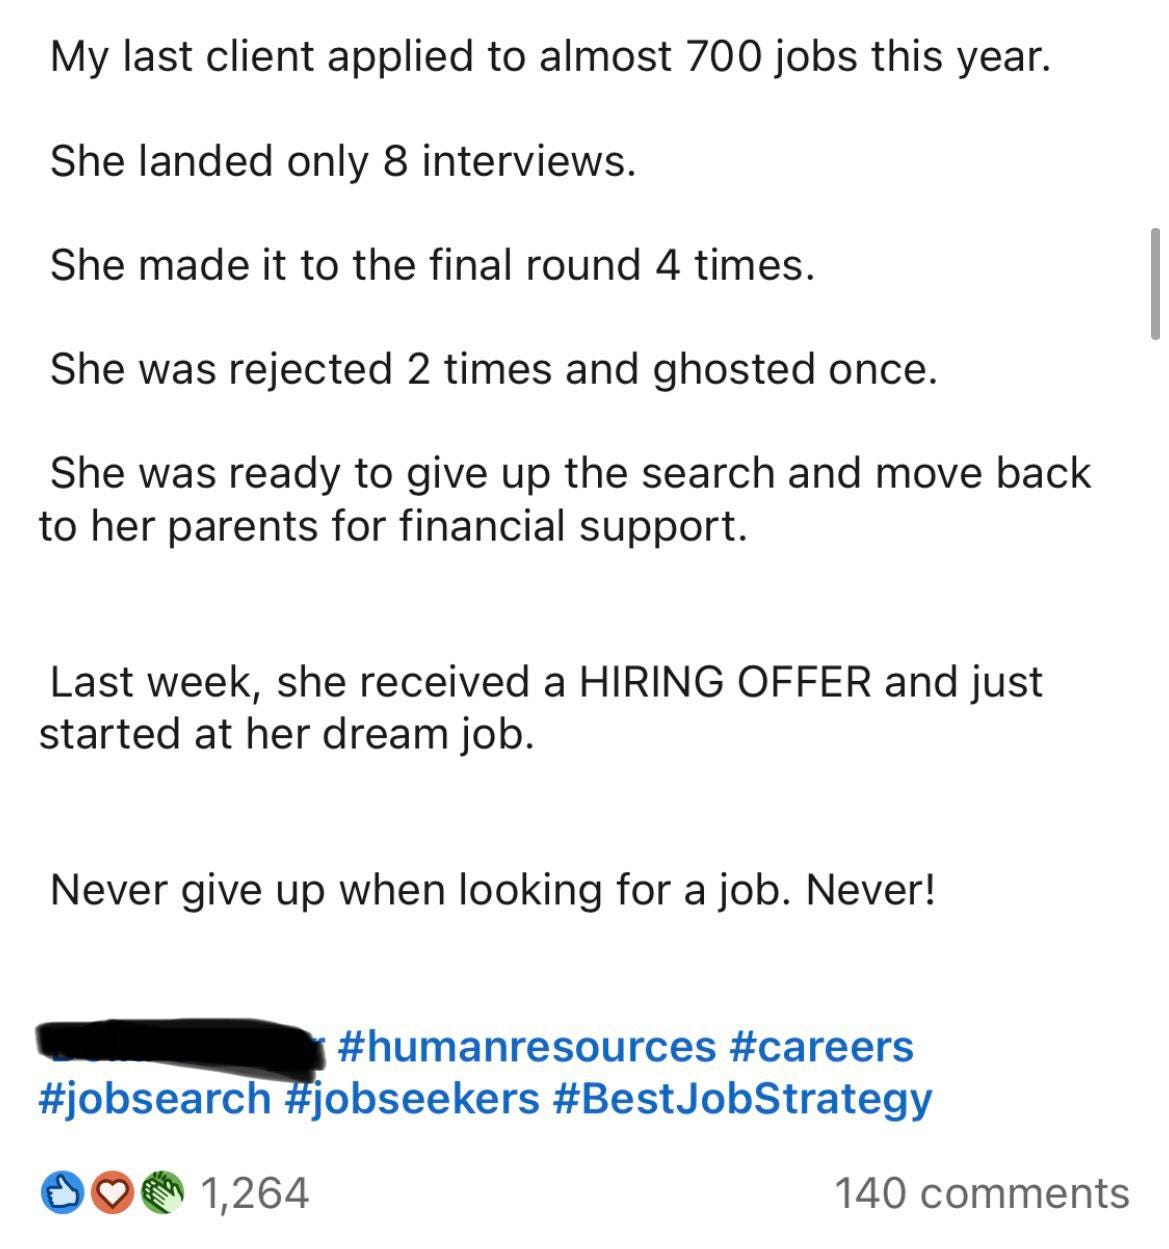 Is this supposed to be inspiring? : r/recruitinghell